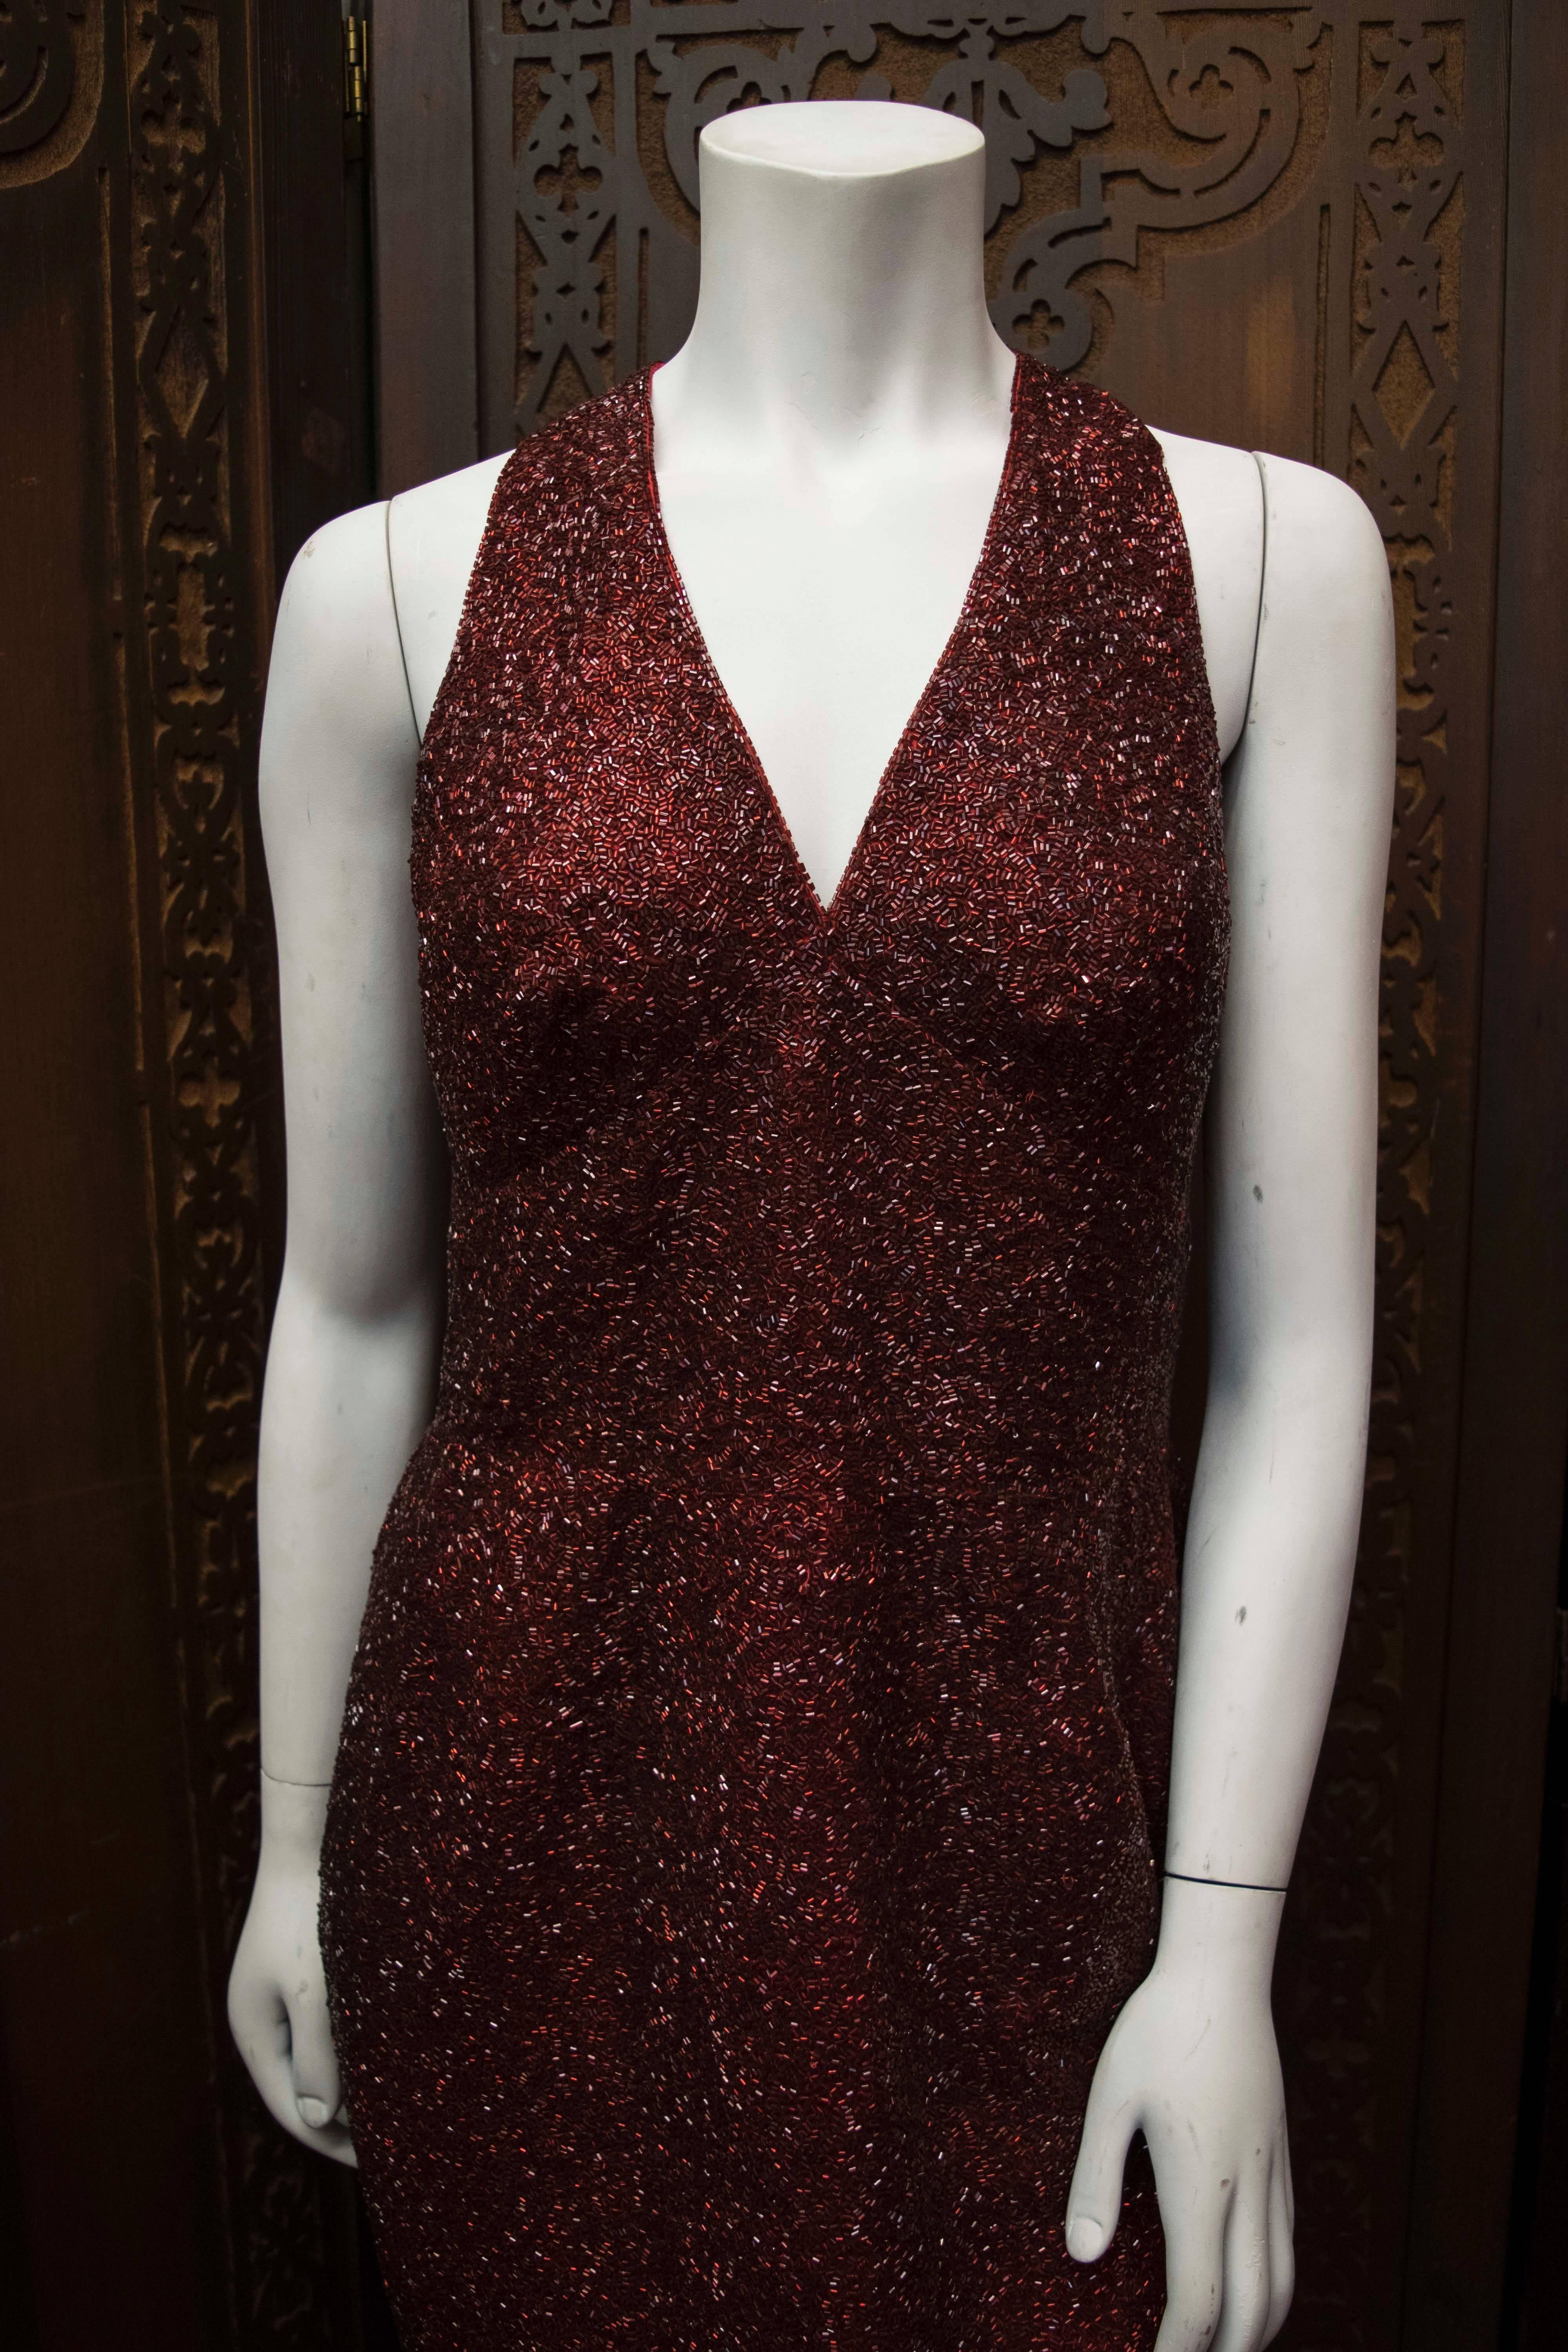 Lillie Rubin Red Beaded Cocktail Dress

Stunning cocktail dress, entirely hand beaded with glass beads. This is a truly show stopping piece. 

B 36
W 30
H 40
L 43